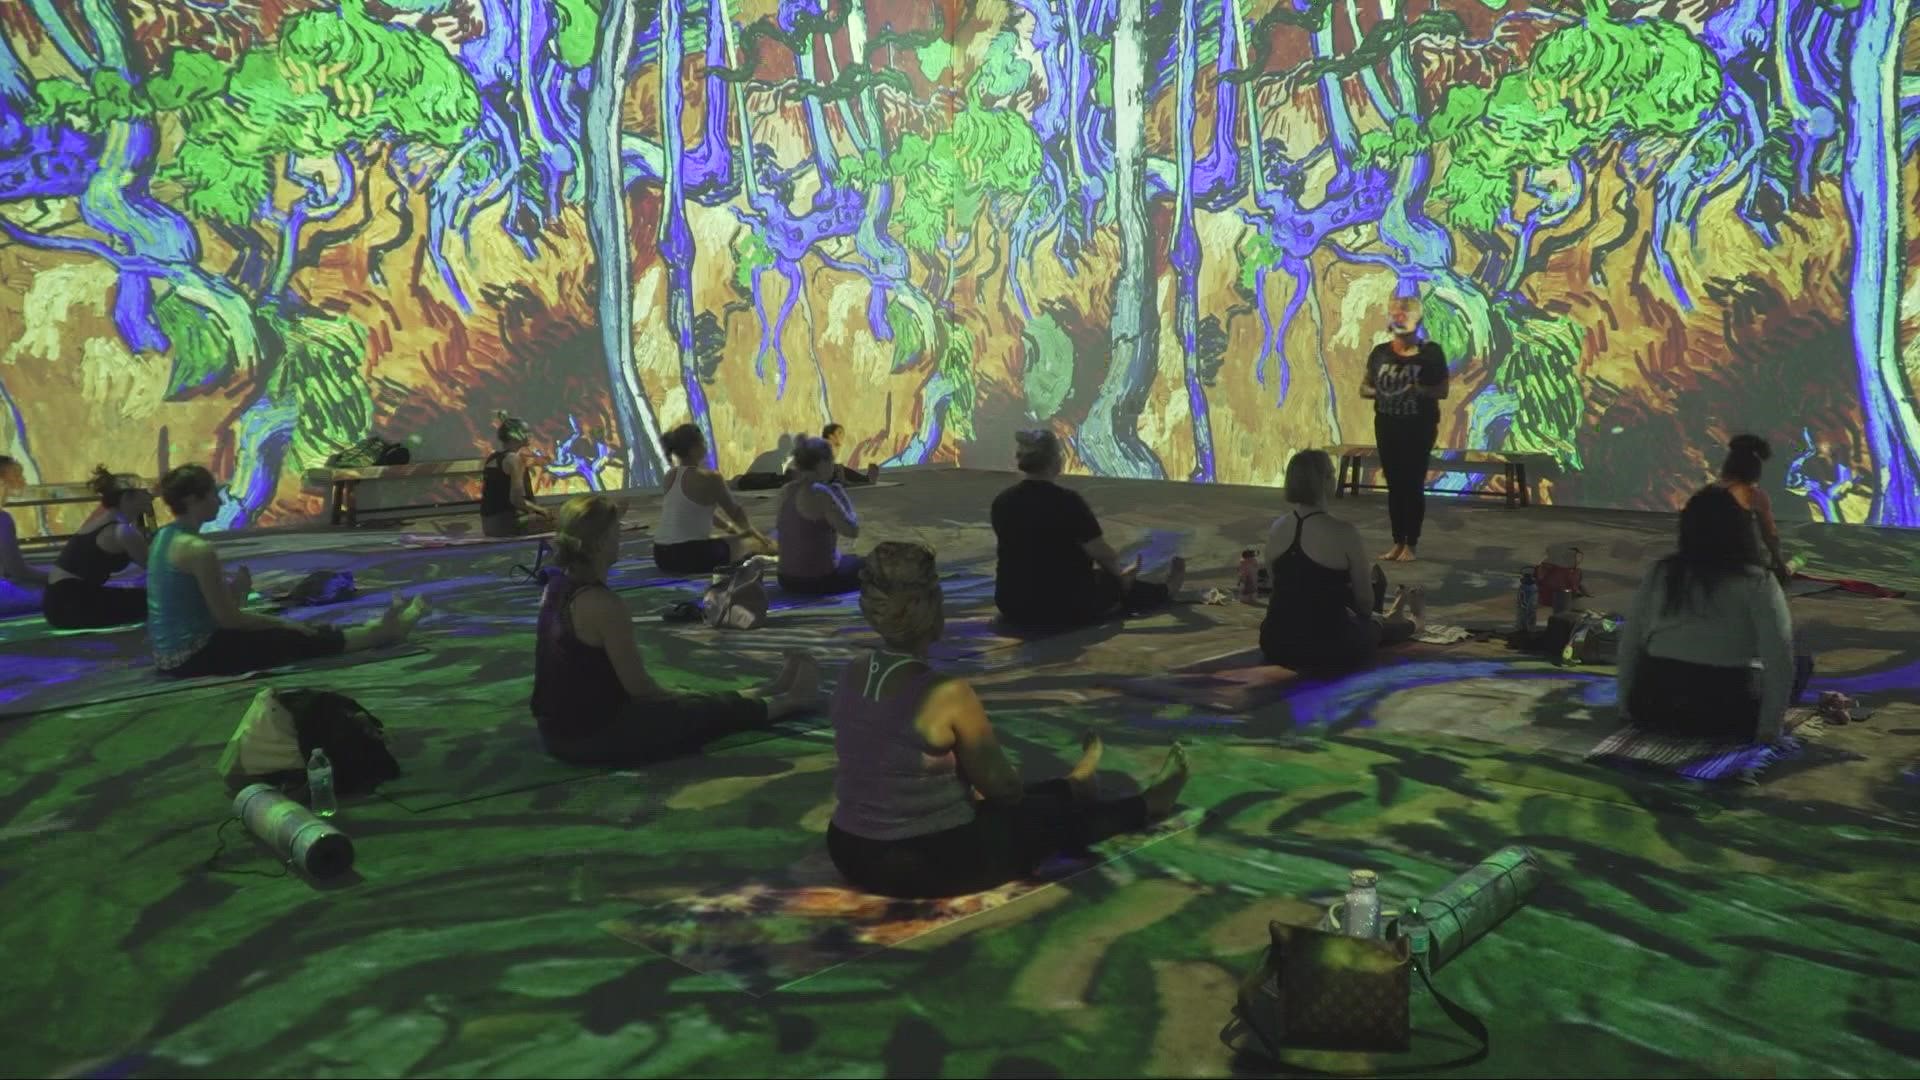 A beginners yoga class is held in a room with interactive, moving van Gogh art. Those who participate can relax, stretch and view colorful art pieces all at once.